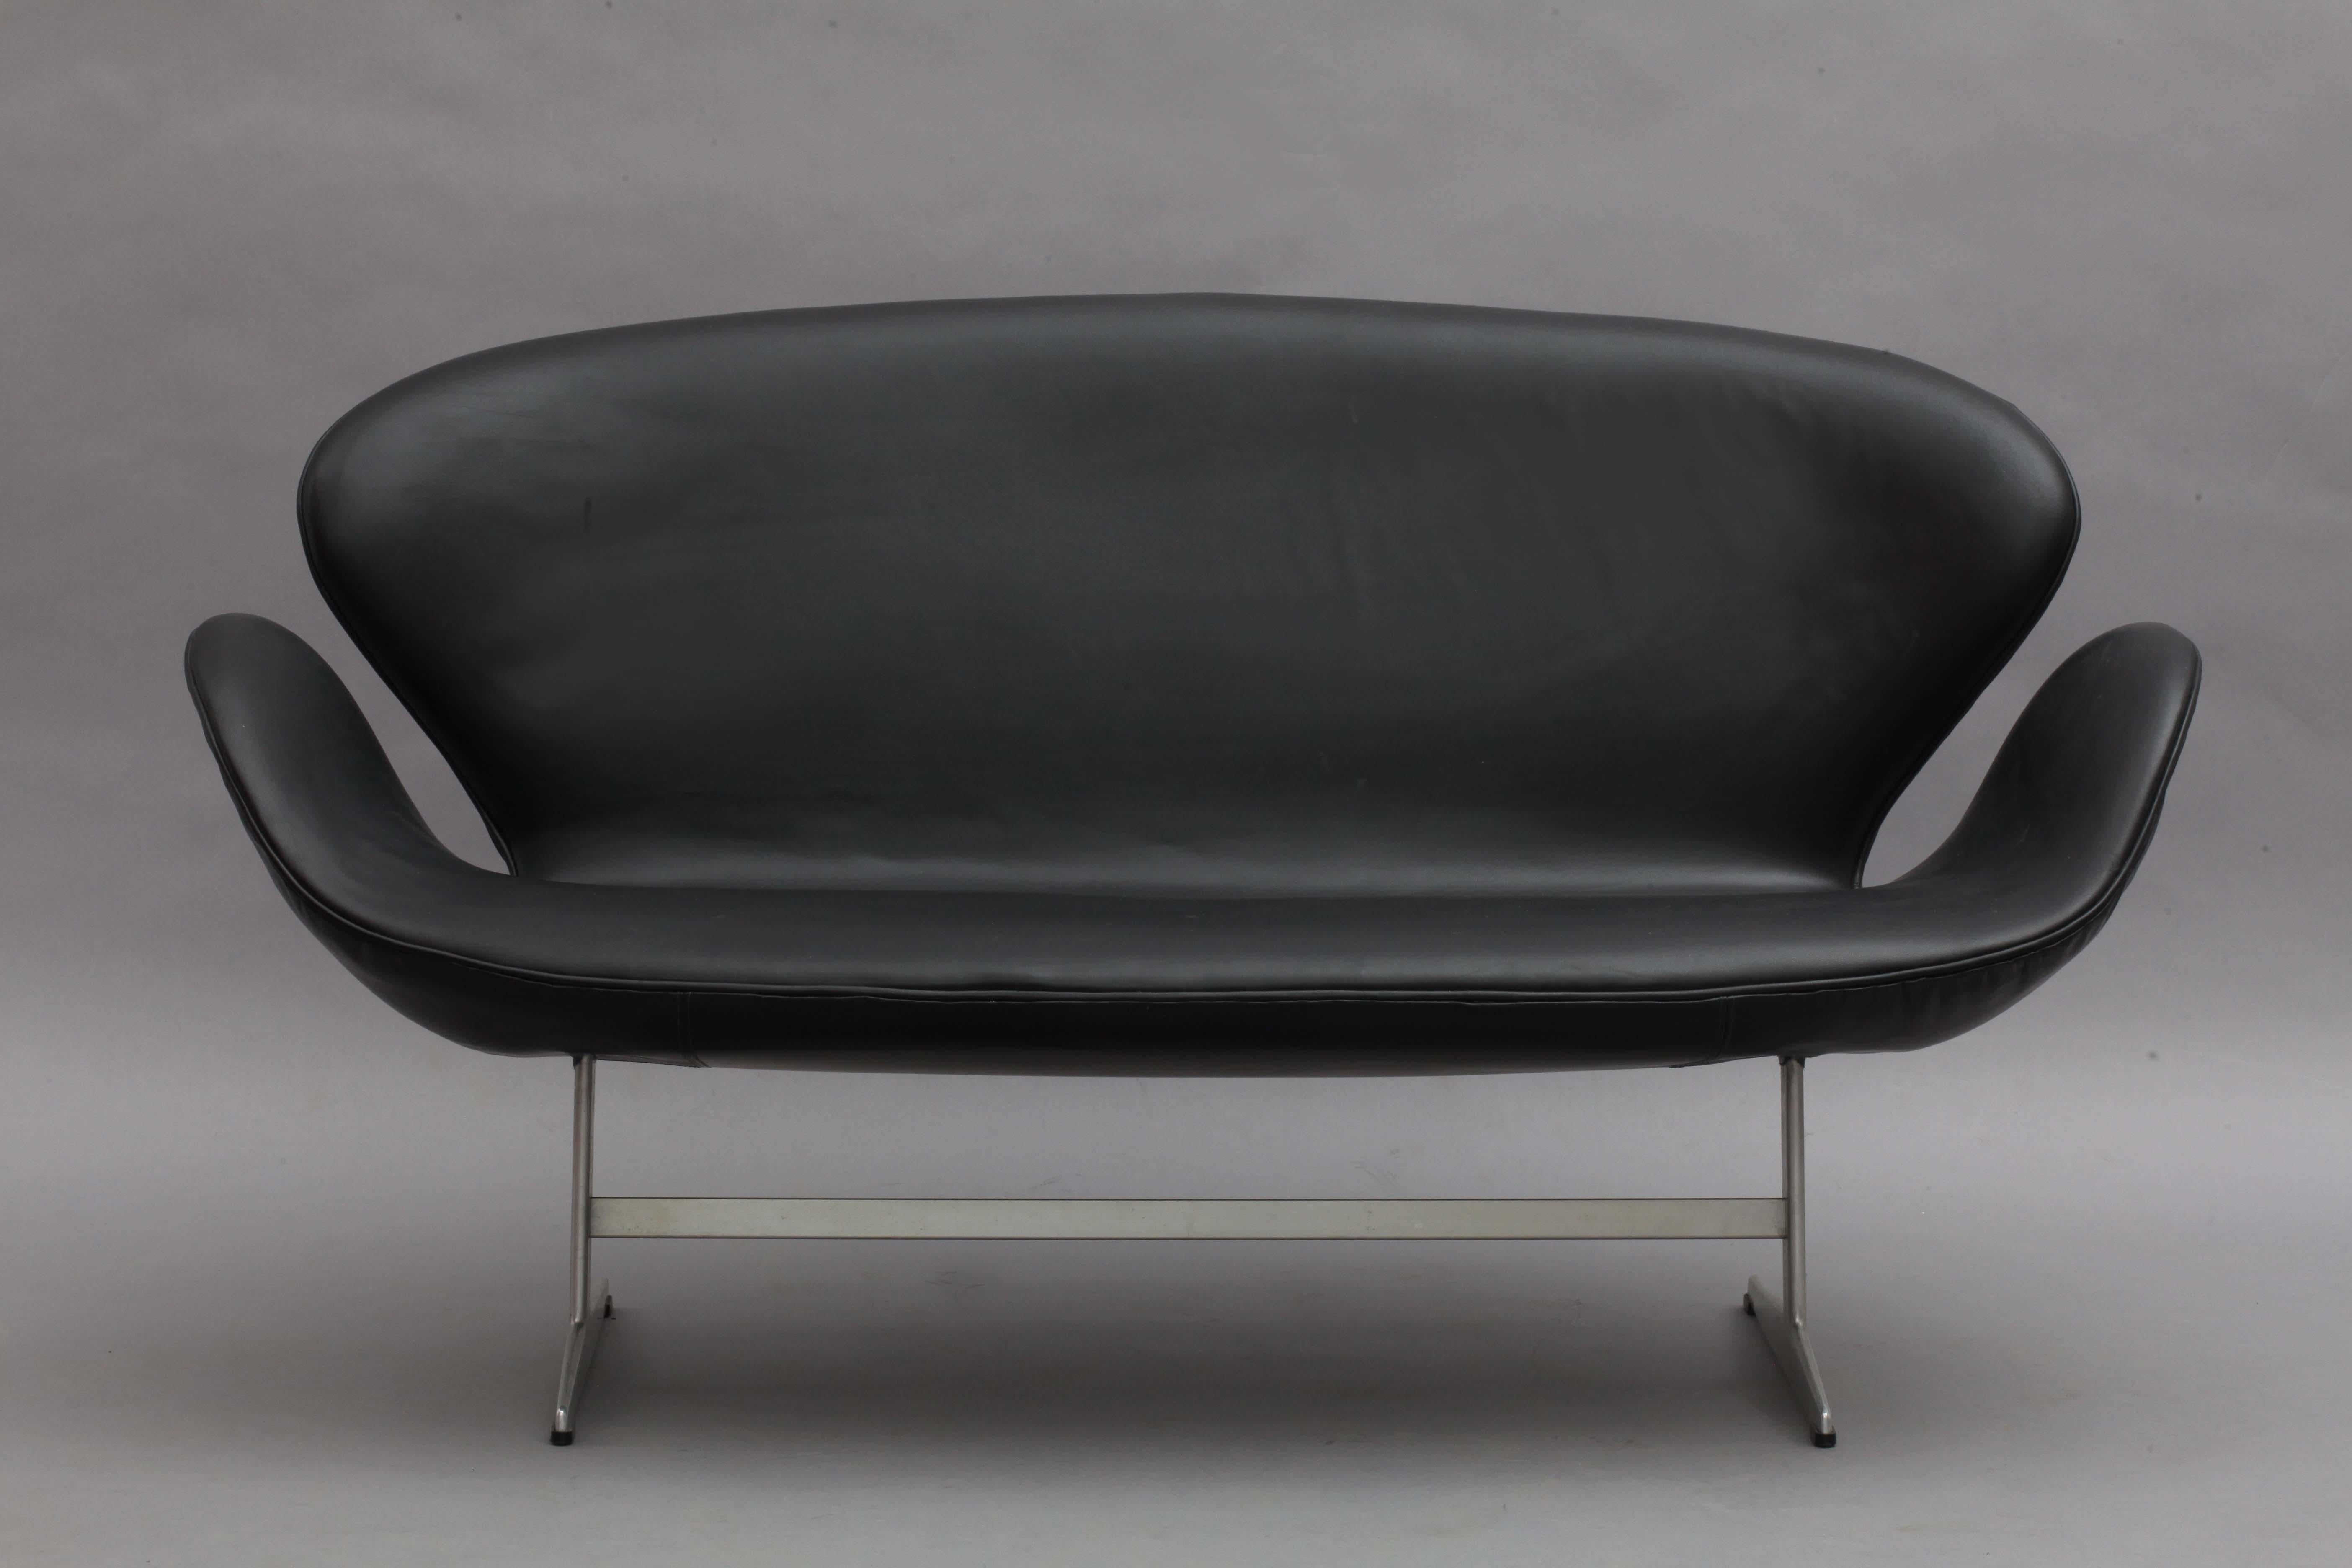 Swan sofa designed by sofa Arne Jacobsen, produced by Fritz Hansen. This iconic piece was originally, designed for the SAS Hotel in Copenhagen, Denmark to accompany the swan chairs and egg chairs that Arne Jacobsen also designed in the 1950s. This